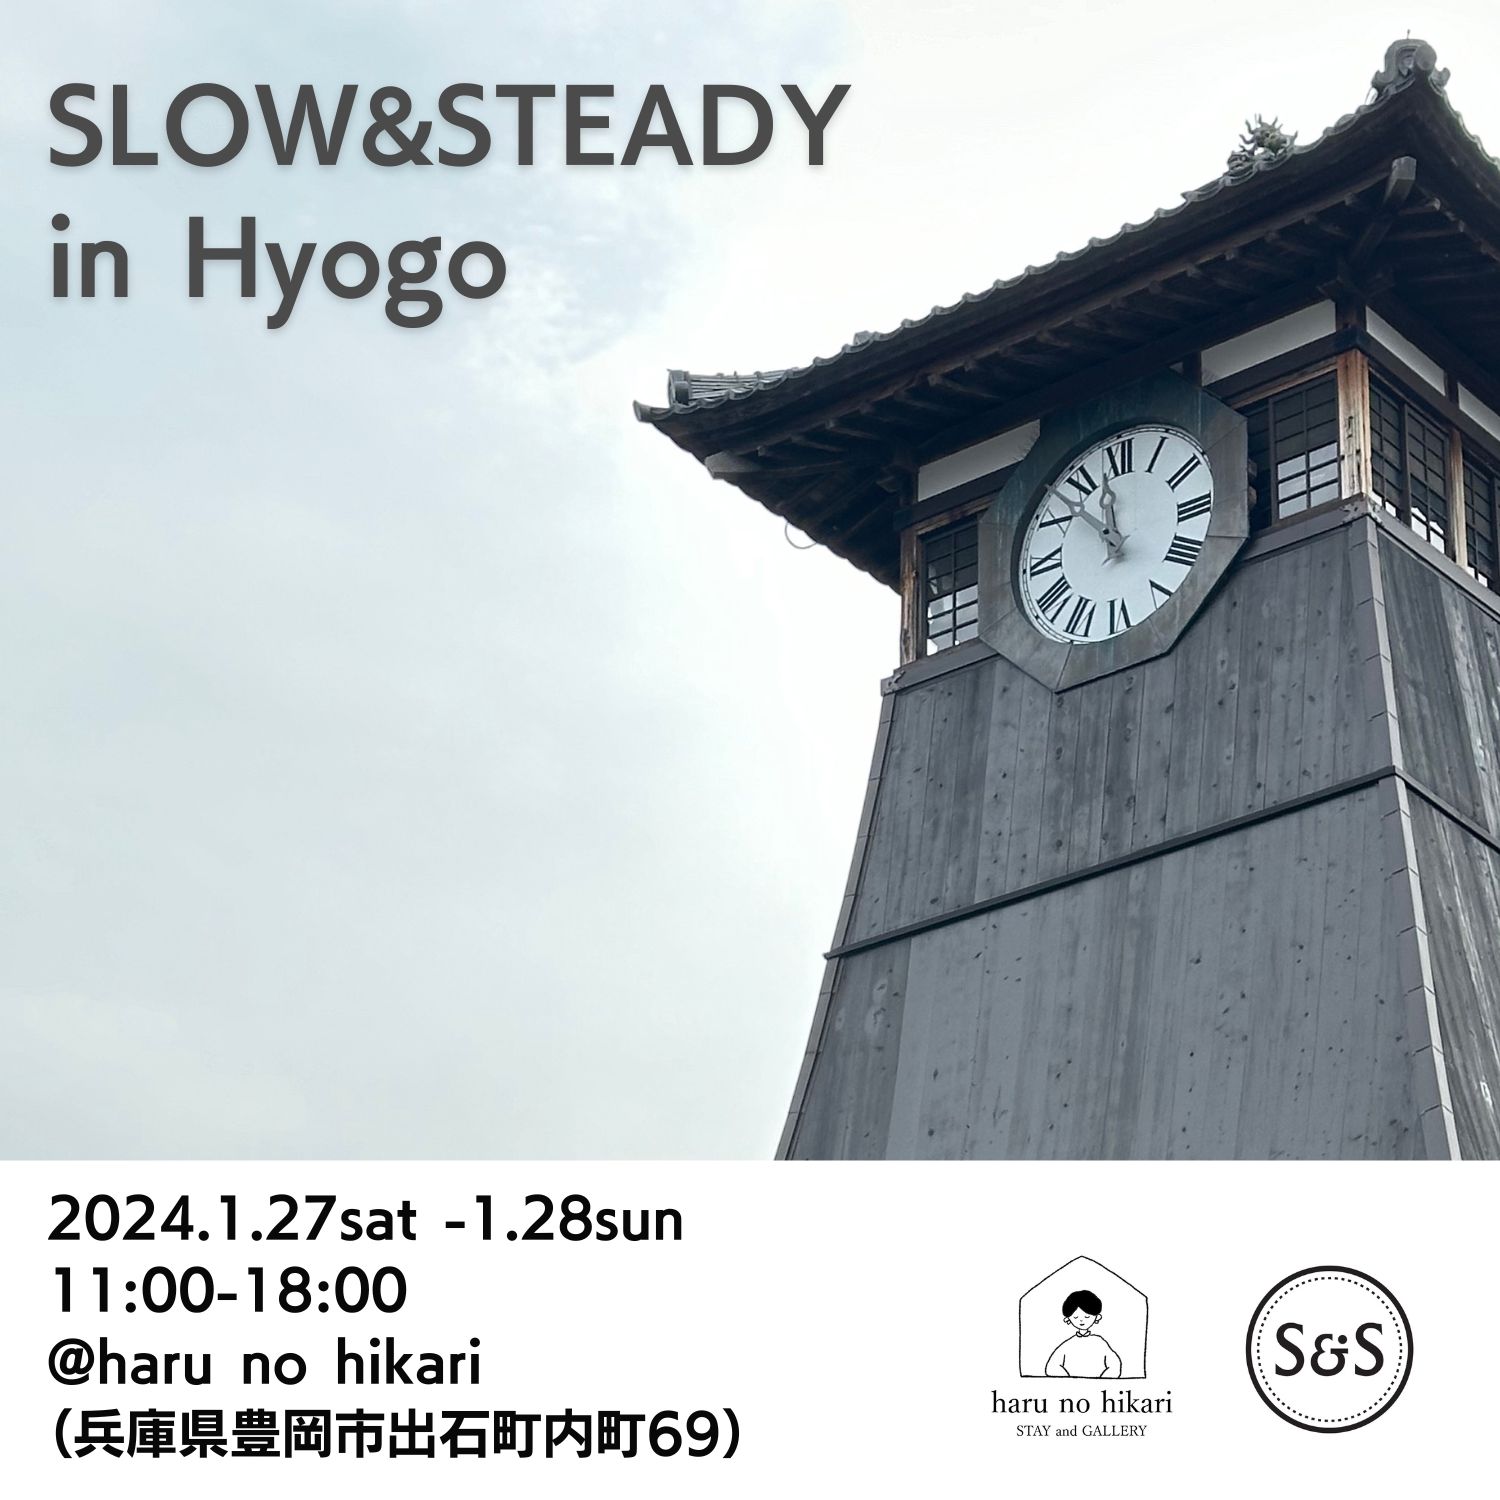 SLOW&STEADY in Hyogoのお知らせ。